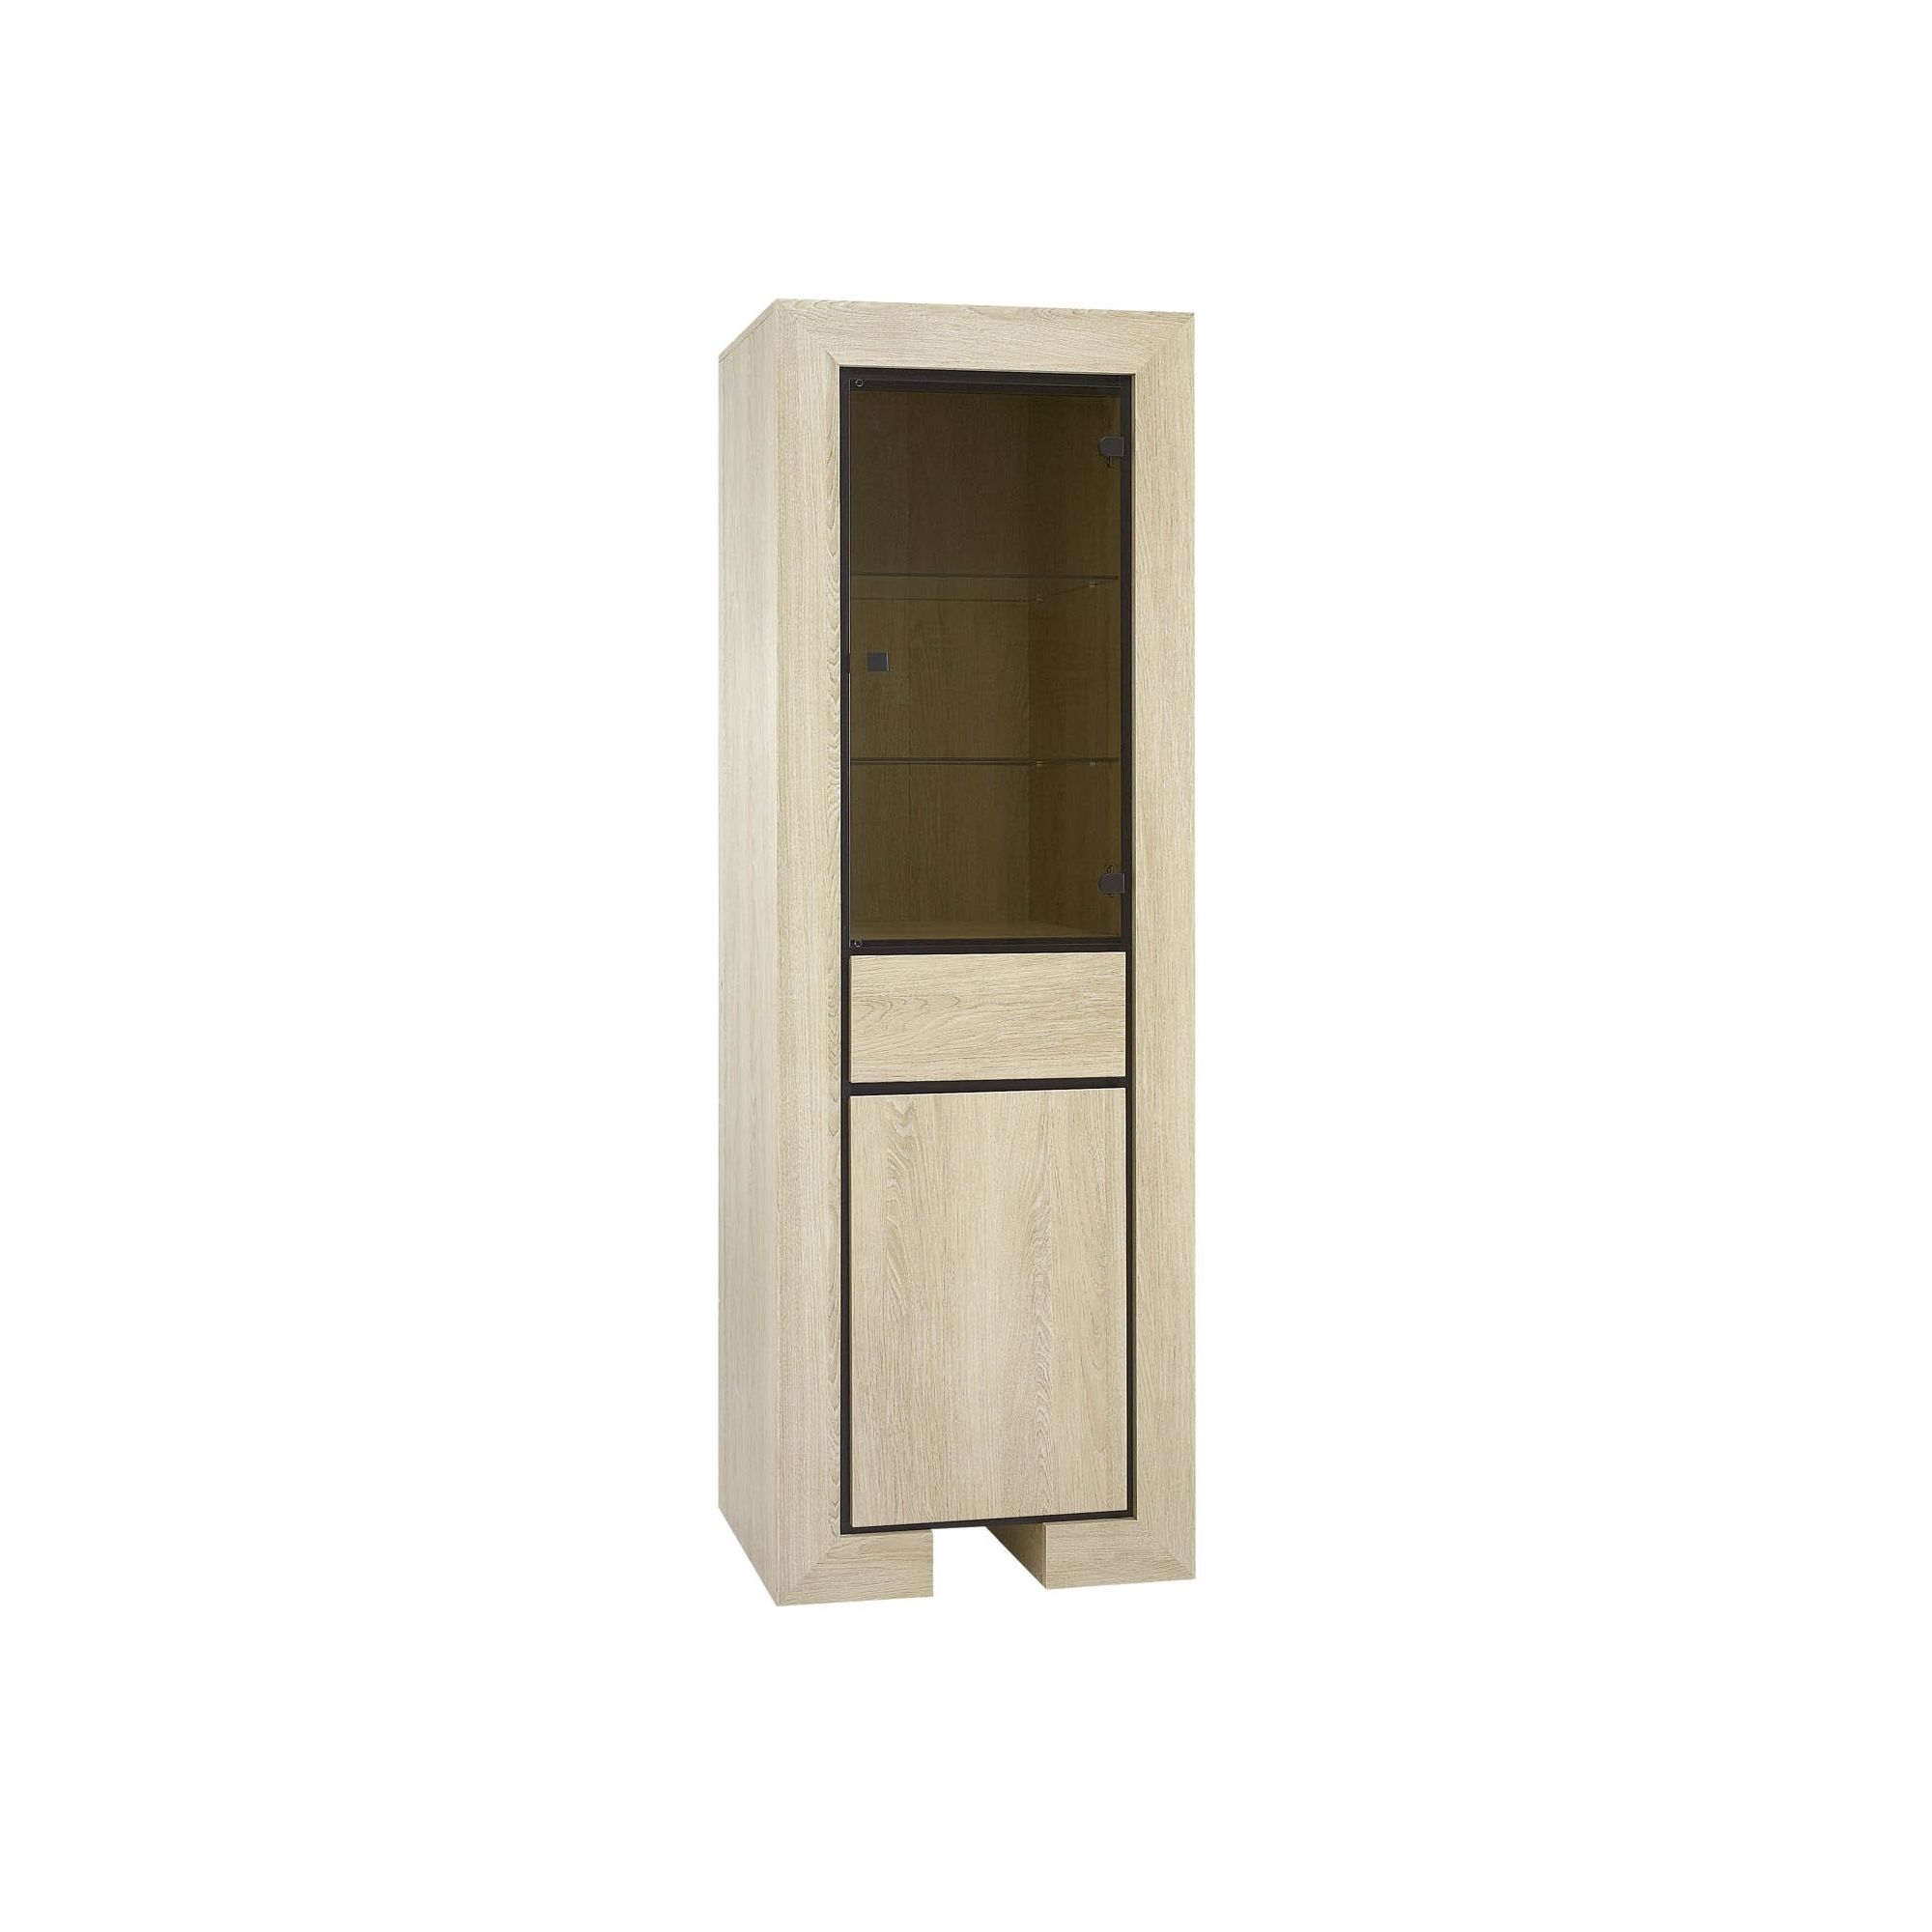 Urbane Designs Dominica Two Door Tall Display Cabinet in Oak at Tesco Direct